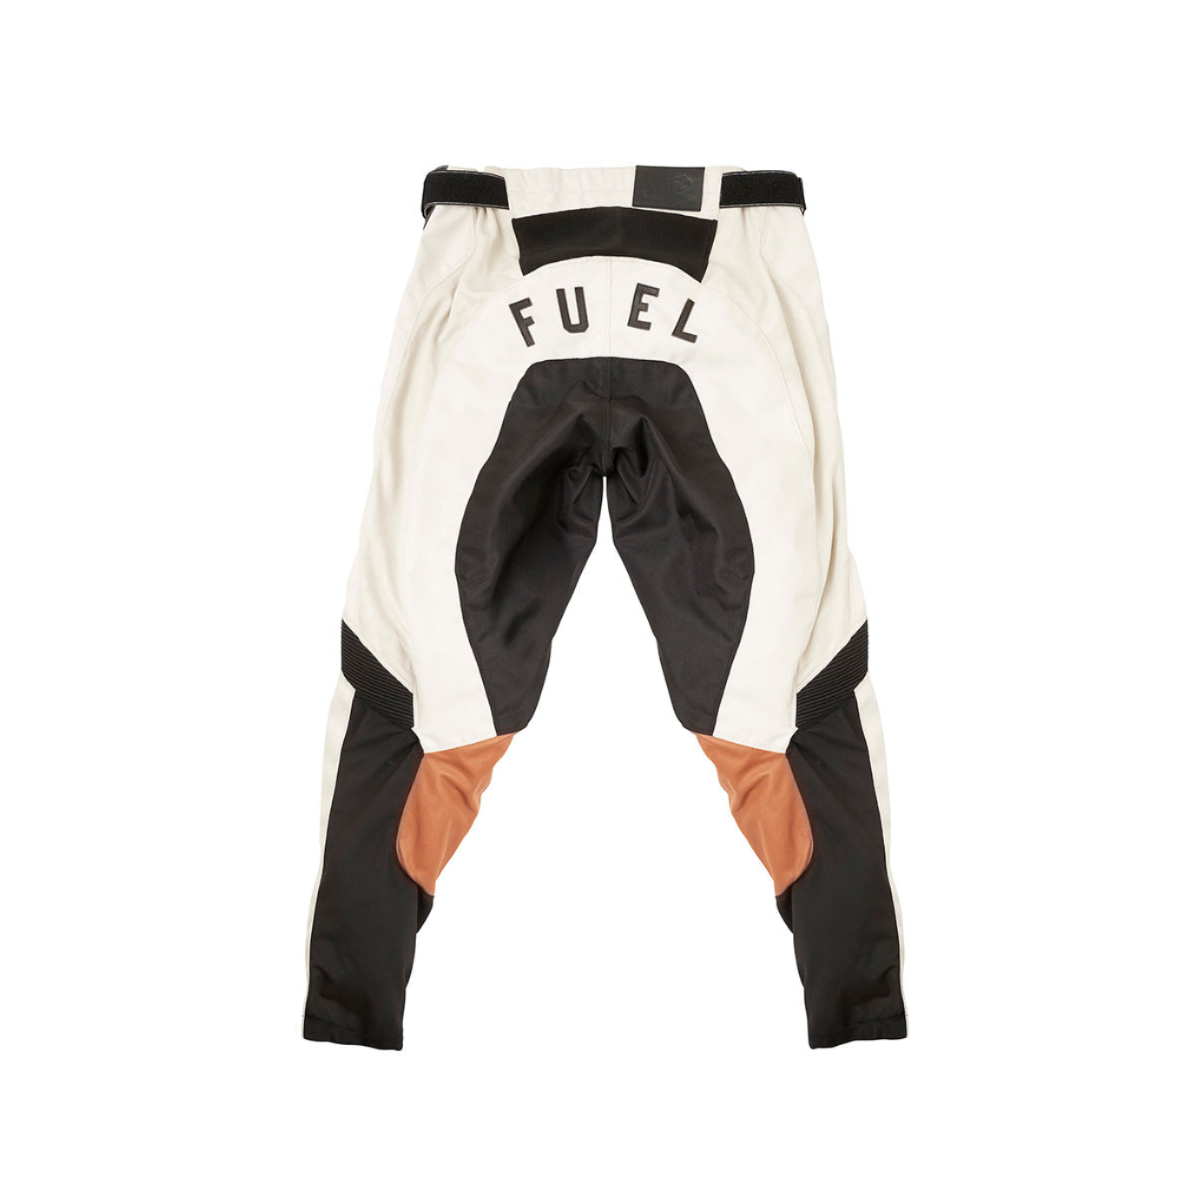 Motorradhose RACING DIVISION, Weiss